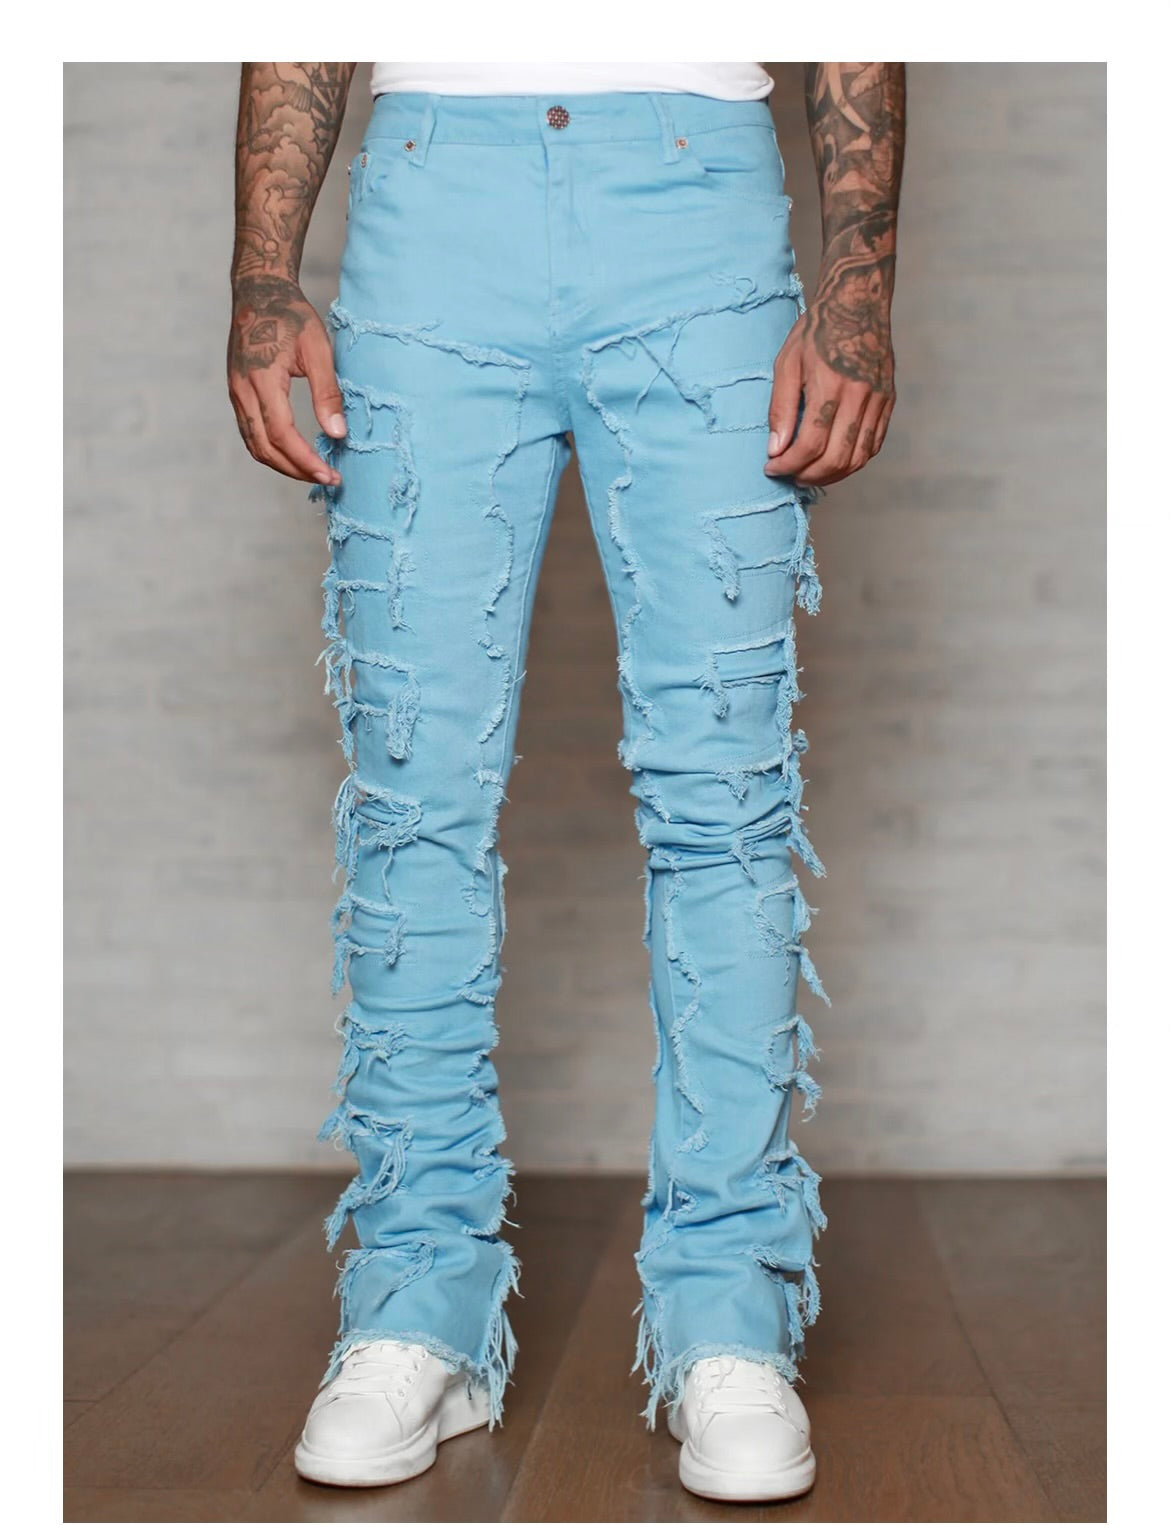 BLUE STACKED JEANS – RE-UP